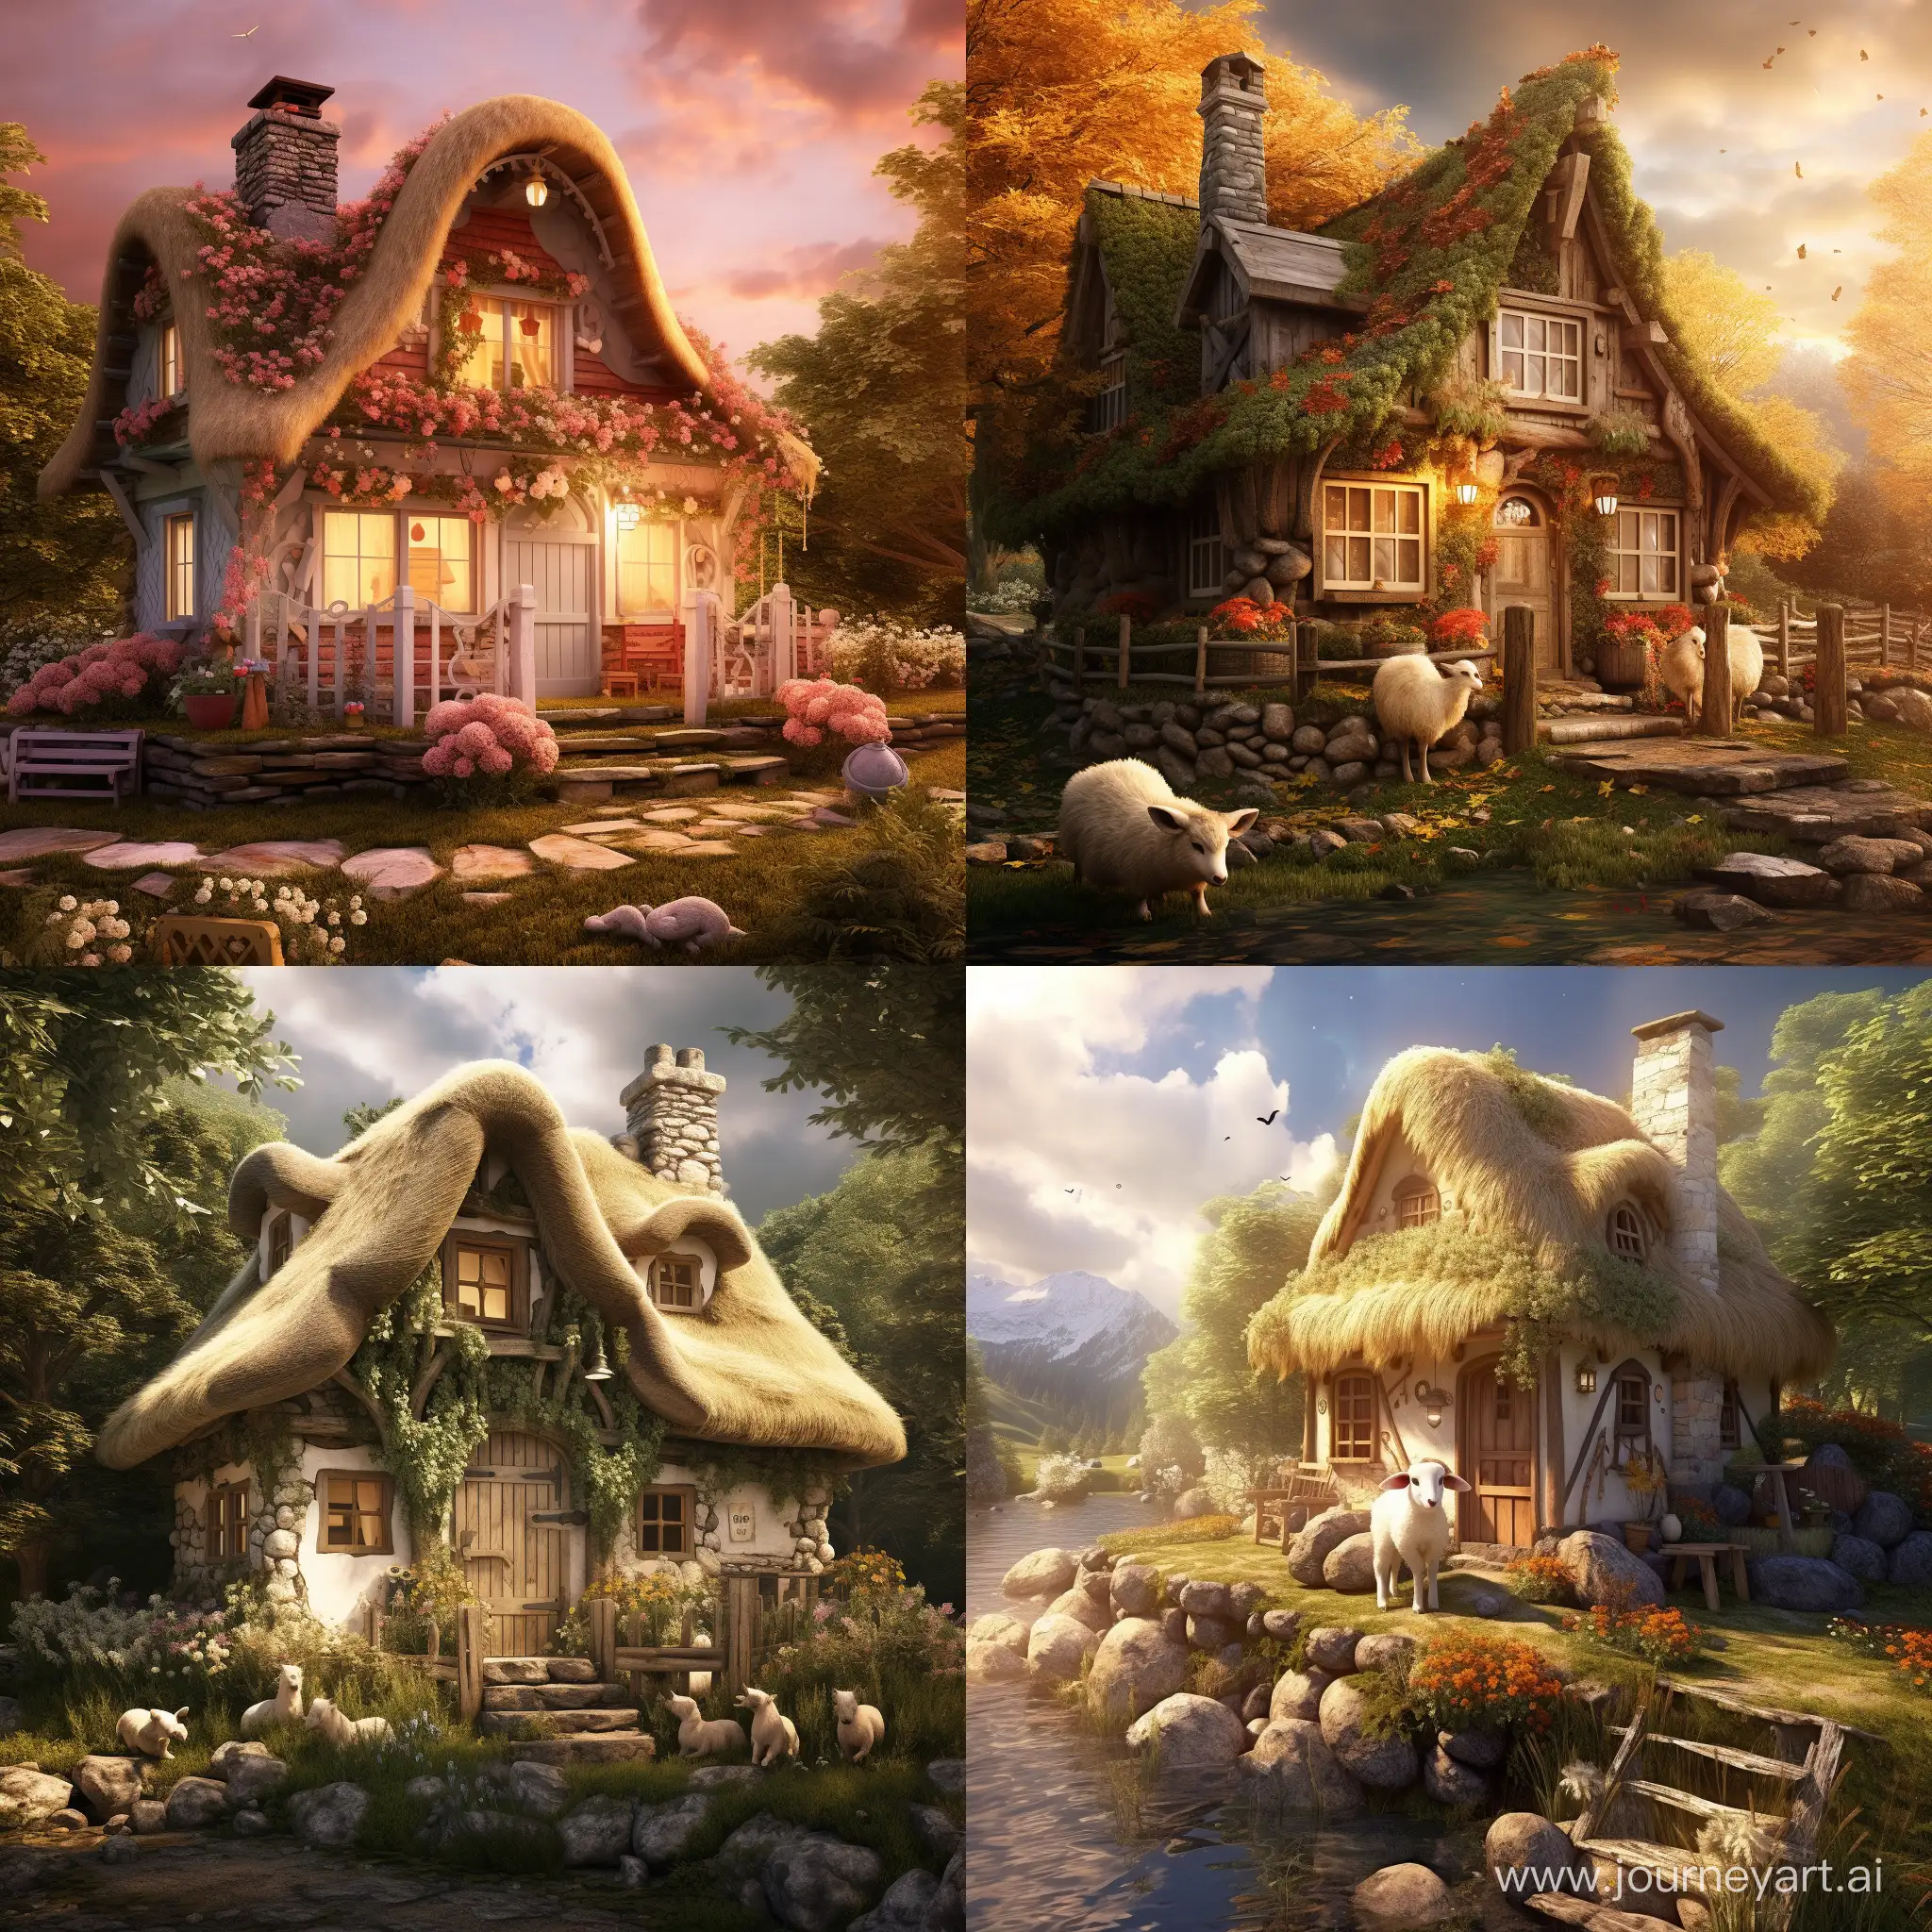 AriesThemed-Cottage-Crafting-Adventure-and-Courage-in-a-Dynamic-Dwelling